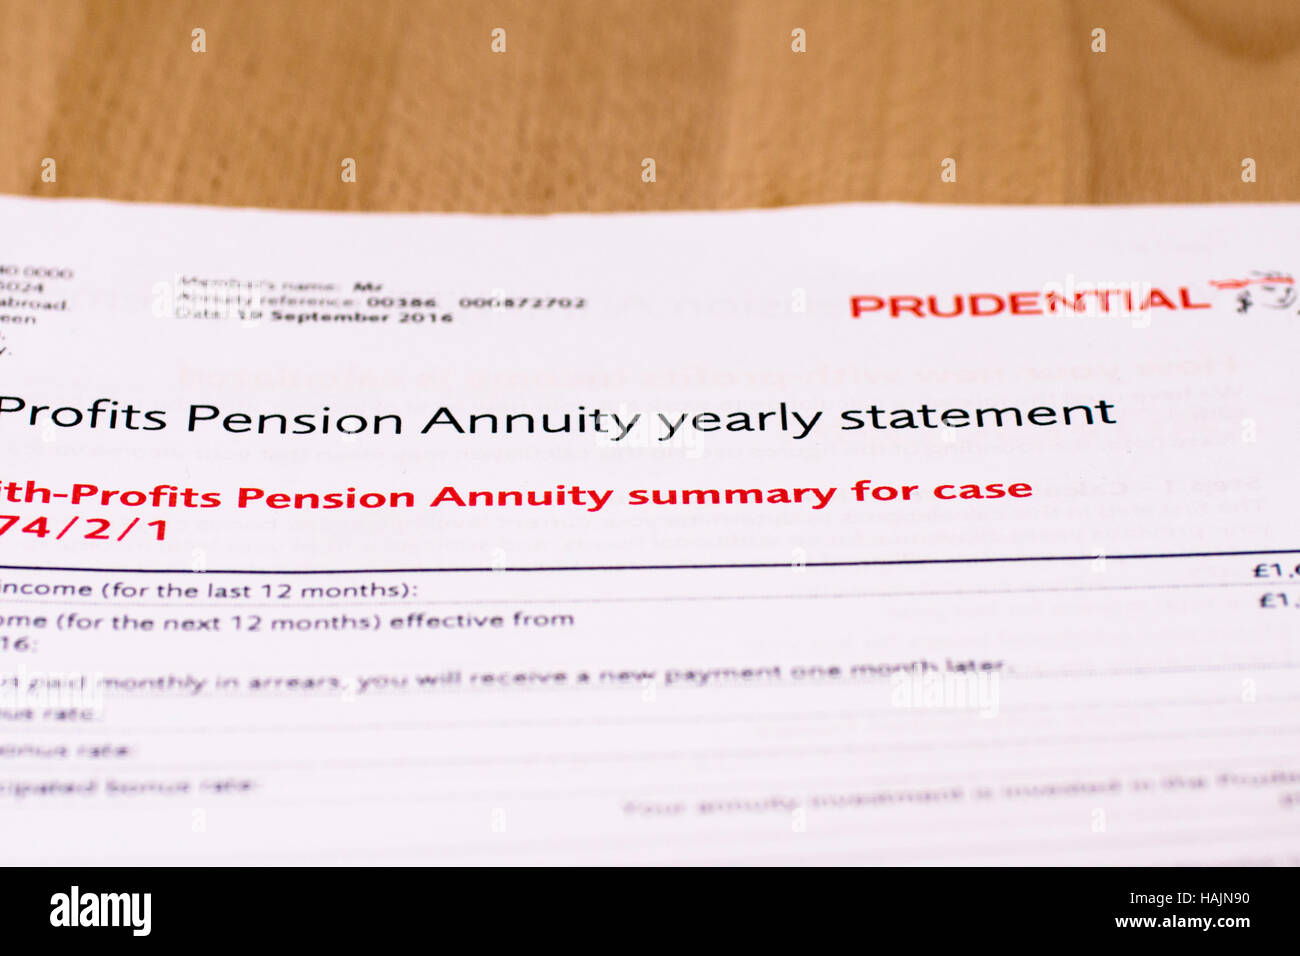 Prudential Pension annuity yearly statement letter Stock Photo